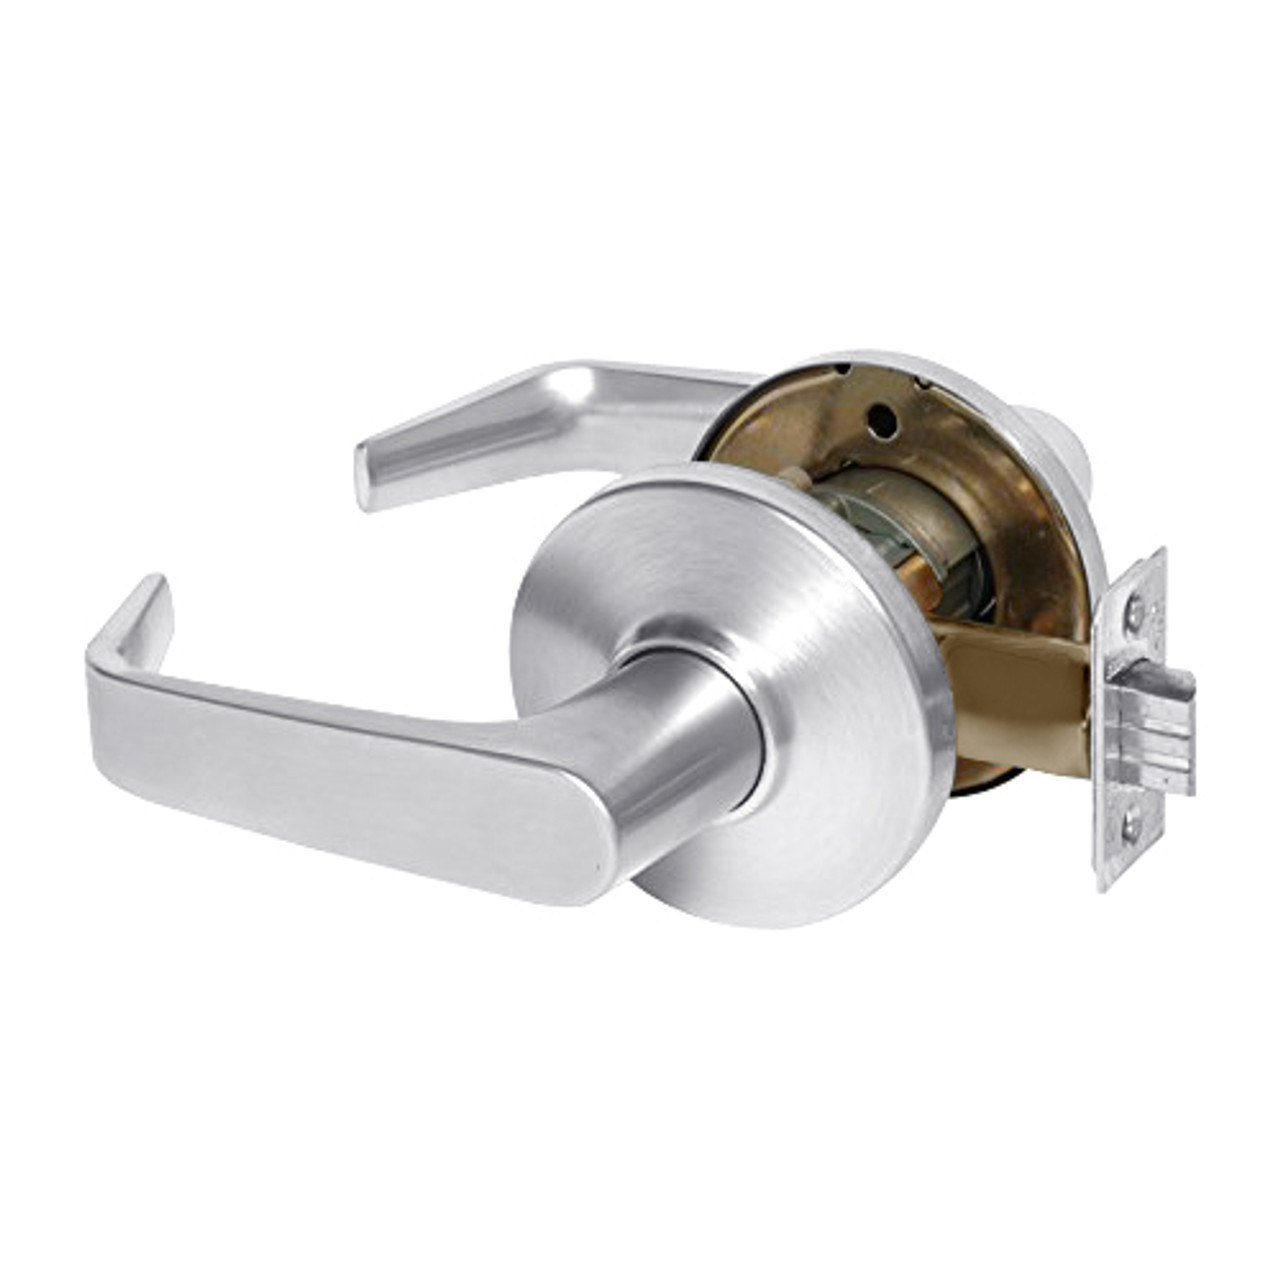 9K30NX15DSTK625LM Best 9K Series Passage Heavy Duty Cylindrical Lever Locks with Contour Angle with Return Lever Design in Bright Chrome